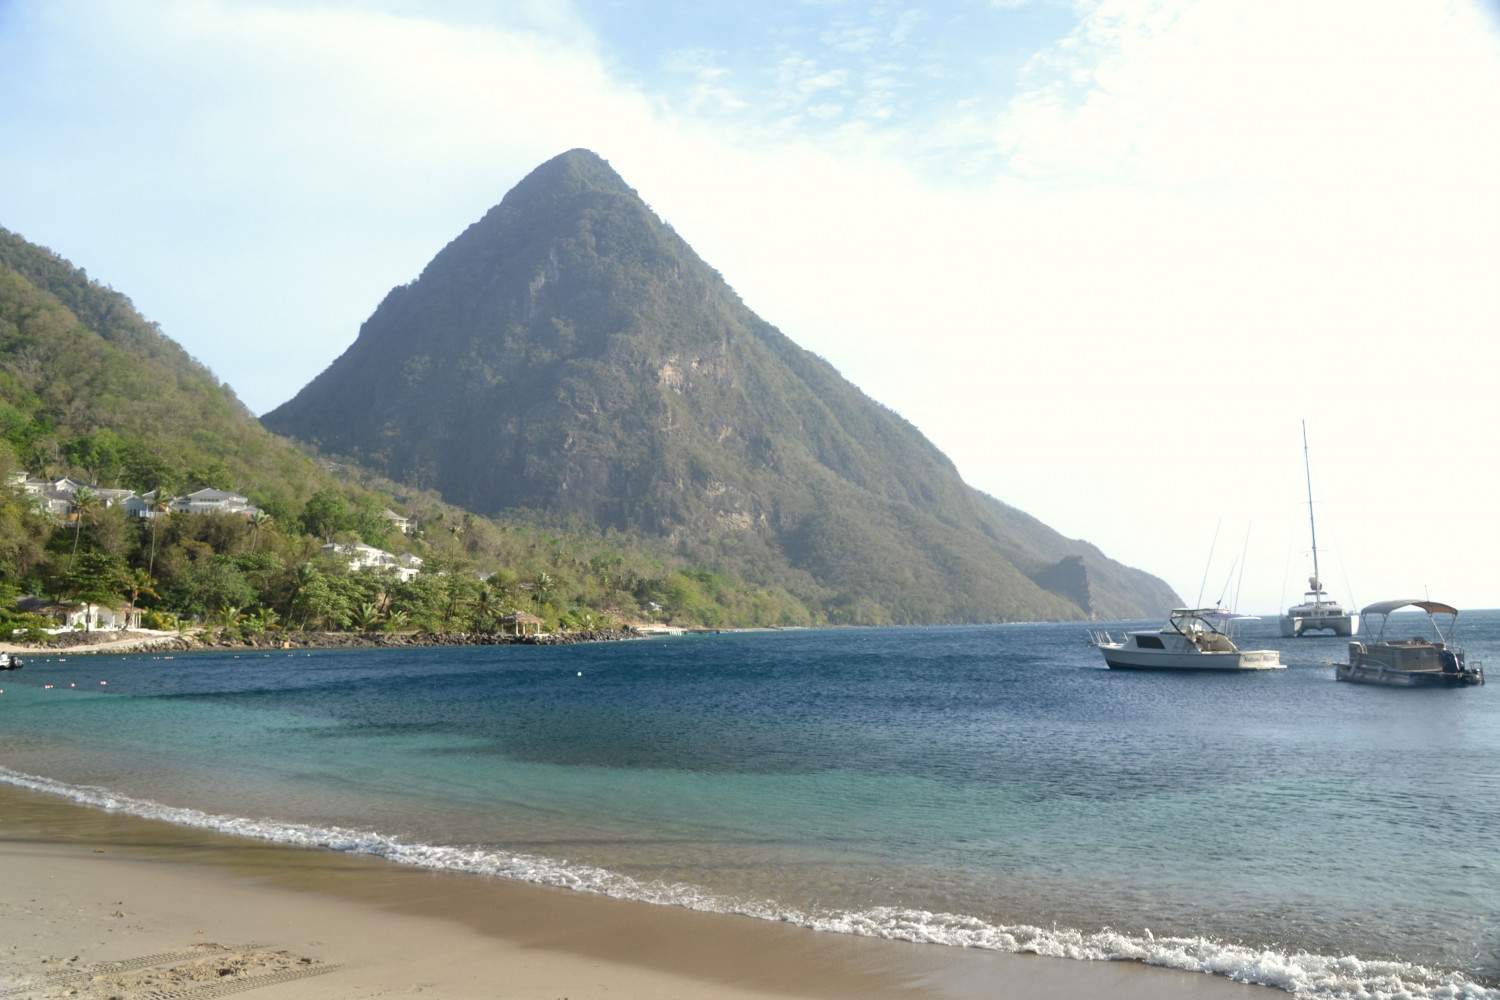 Three different boat types anchored at St. Lucia island